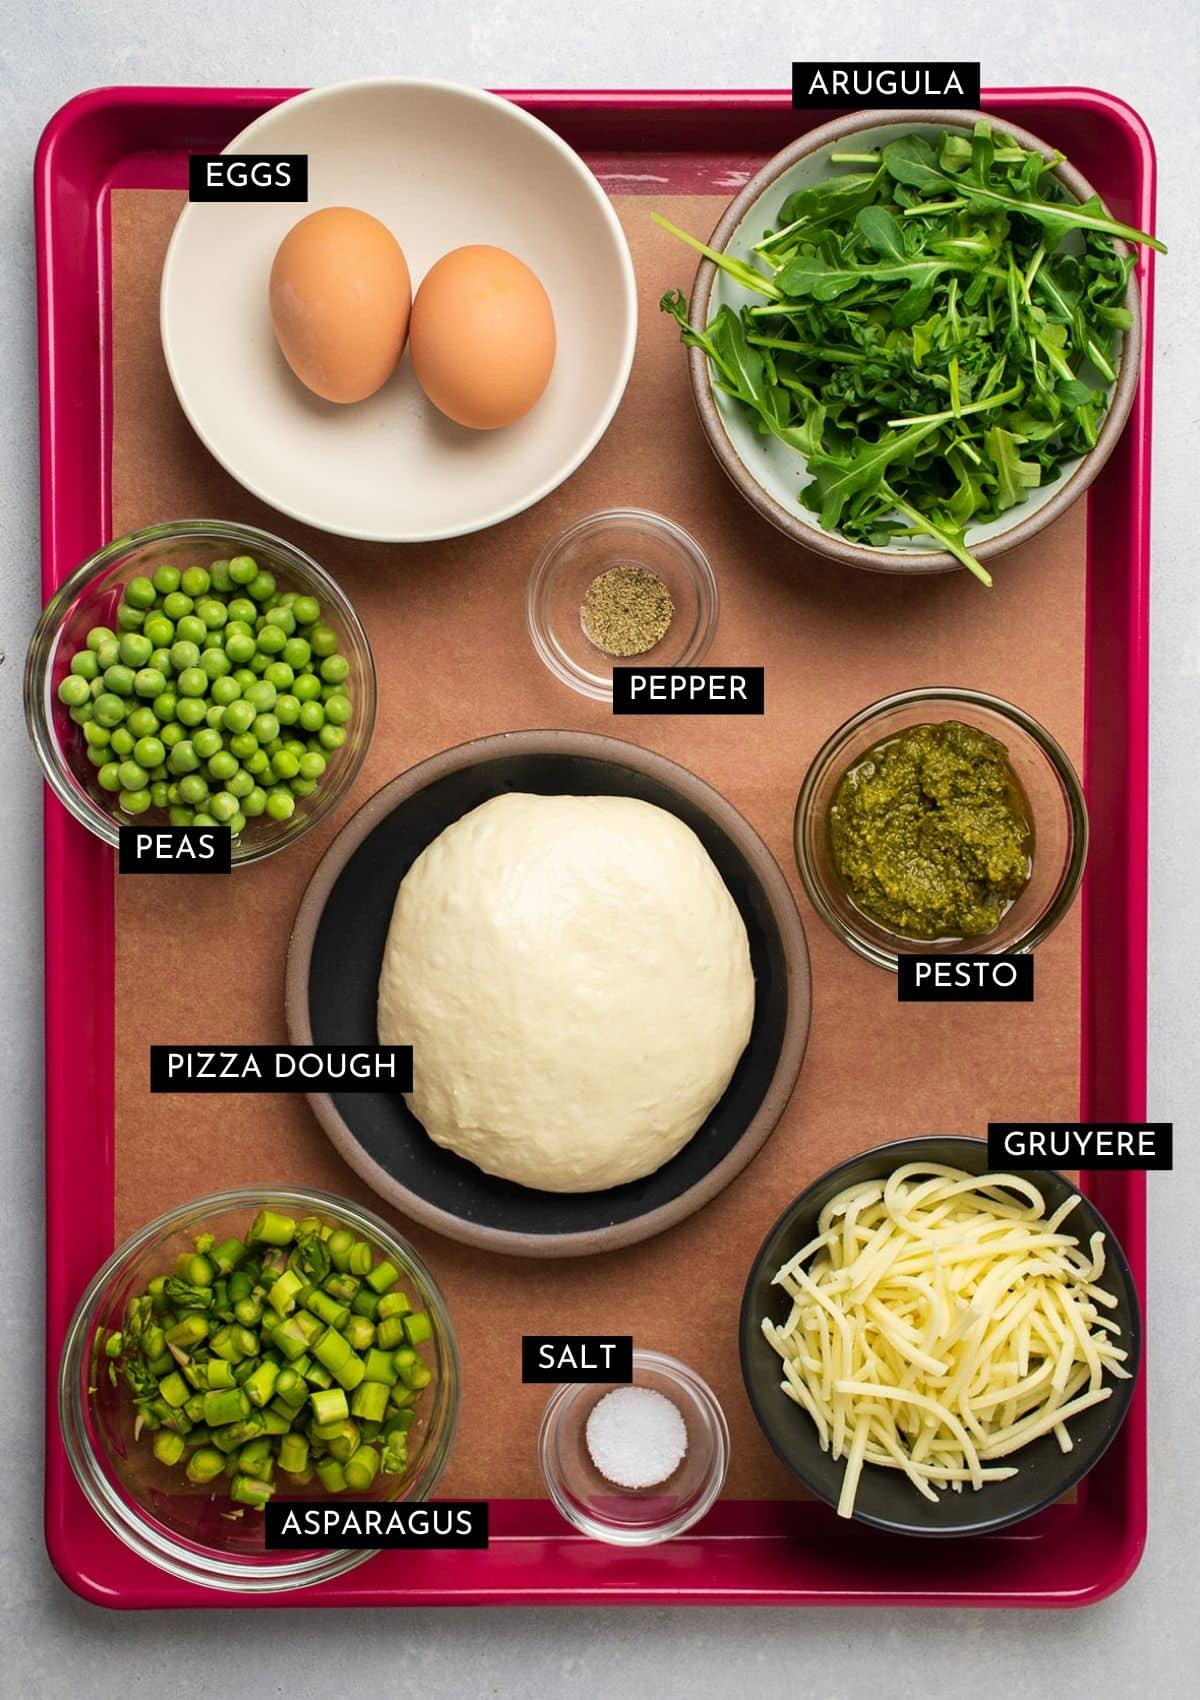 Pizza ingredients, organized into individual bowls on a pink baking sheet.